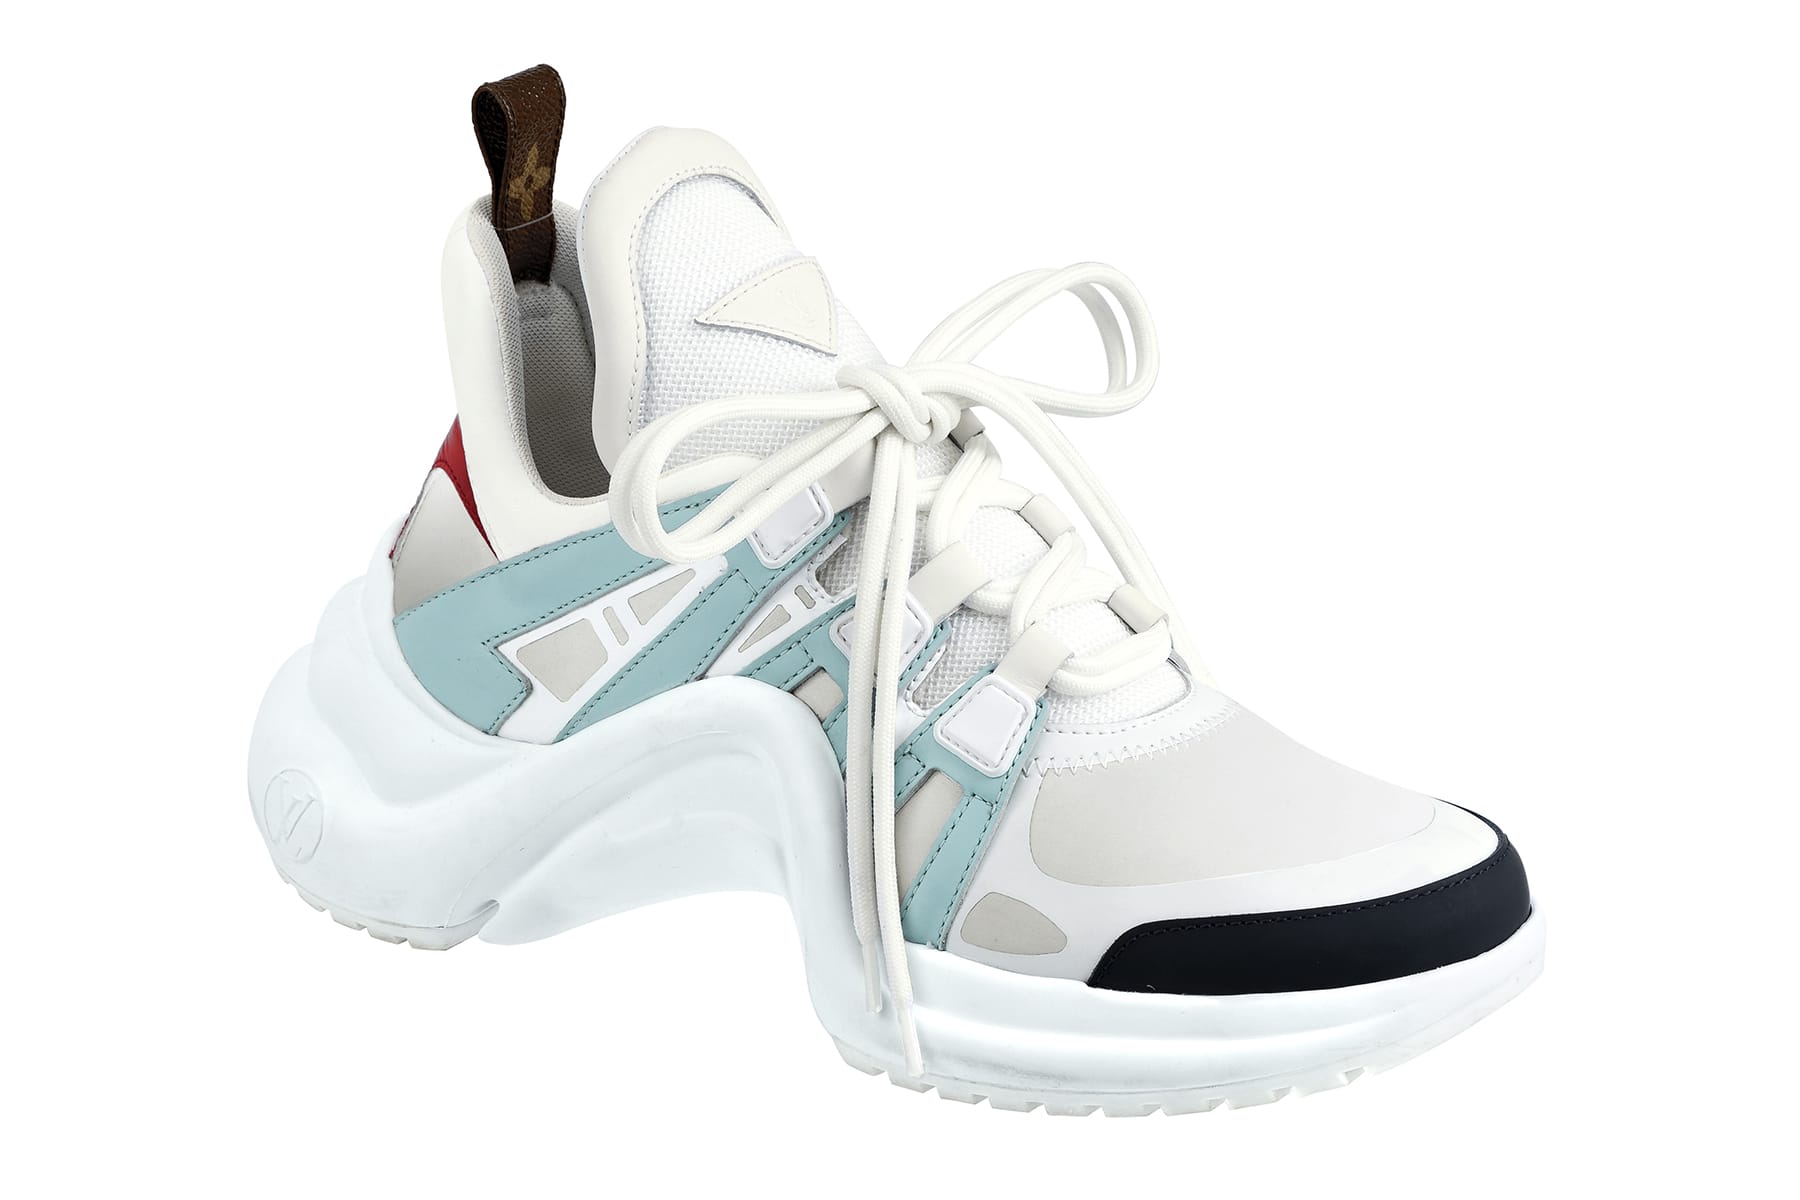 archlight sneakers price